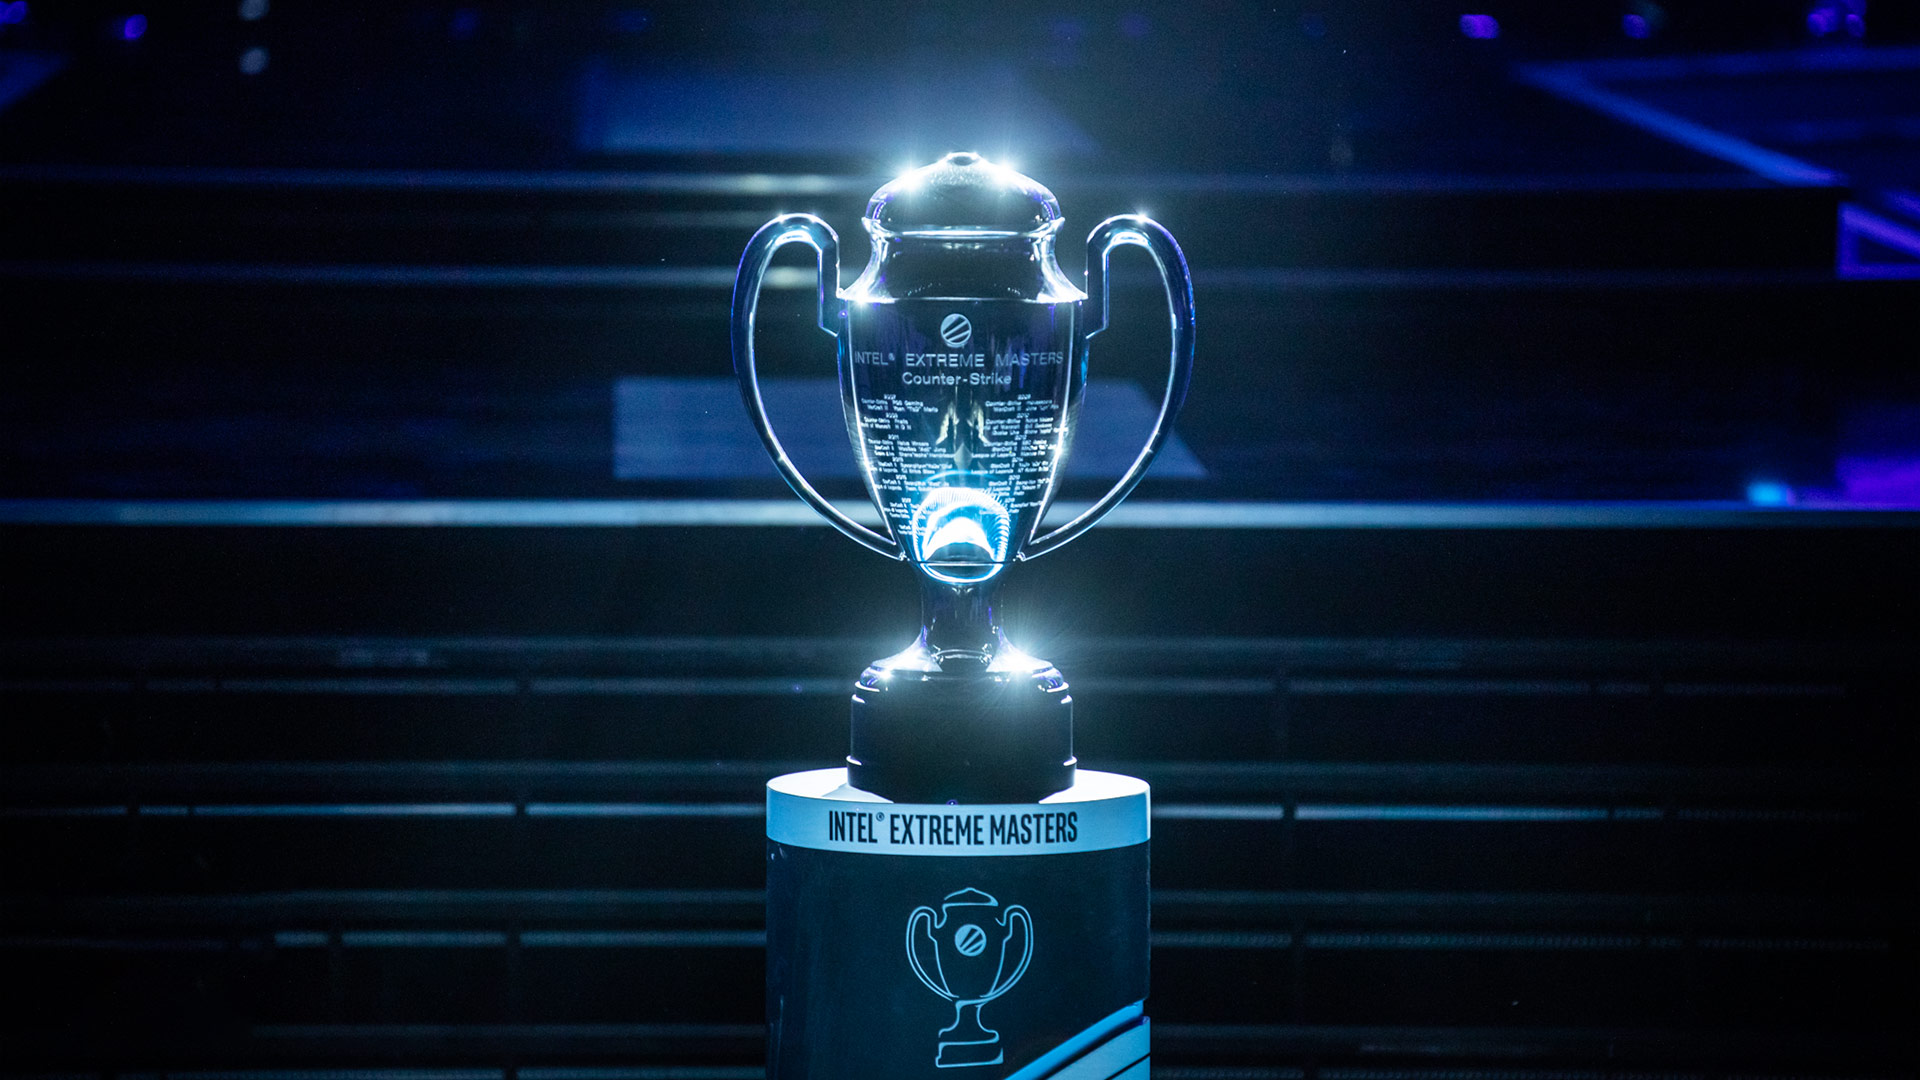 Intel extreme masters trophy